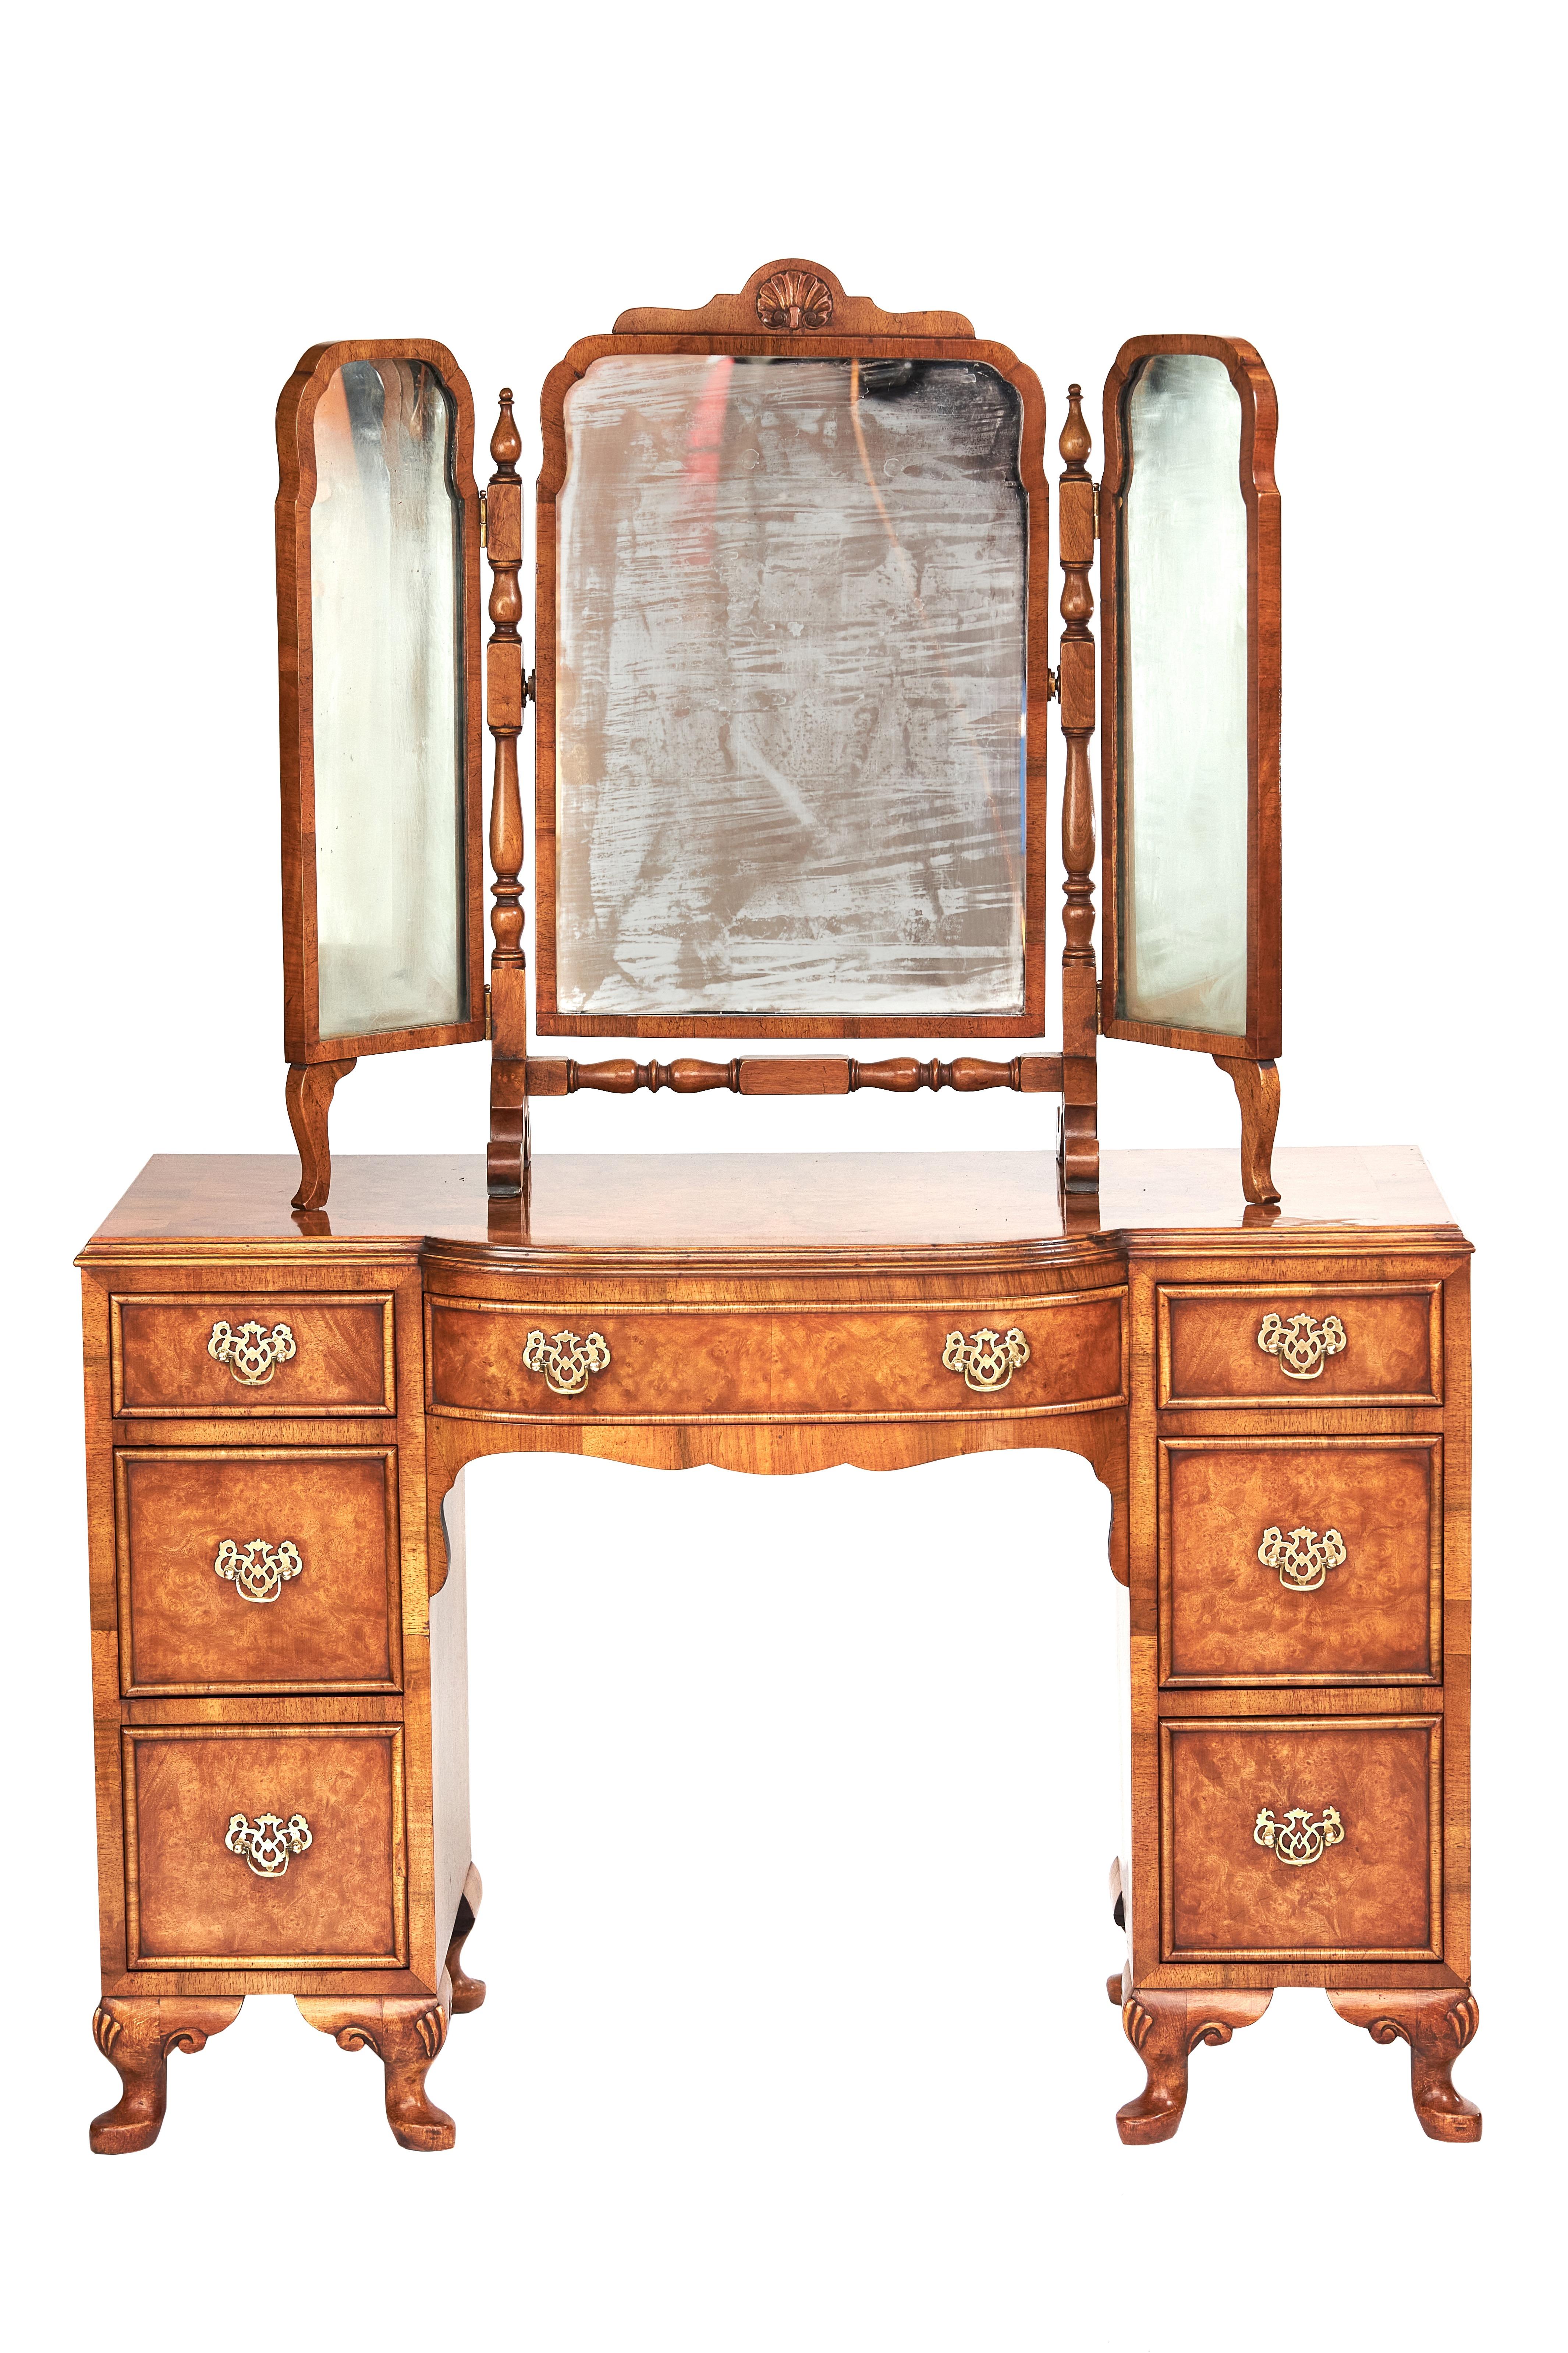 Polished Walnut Queen Anne Style Kneehole Burr Walnut Dressing Table with Stool For Sale